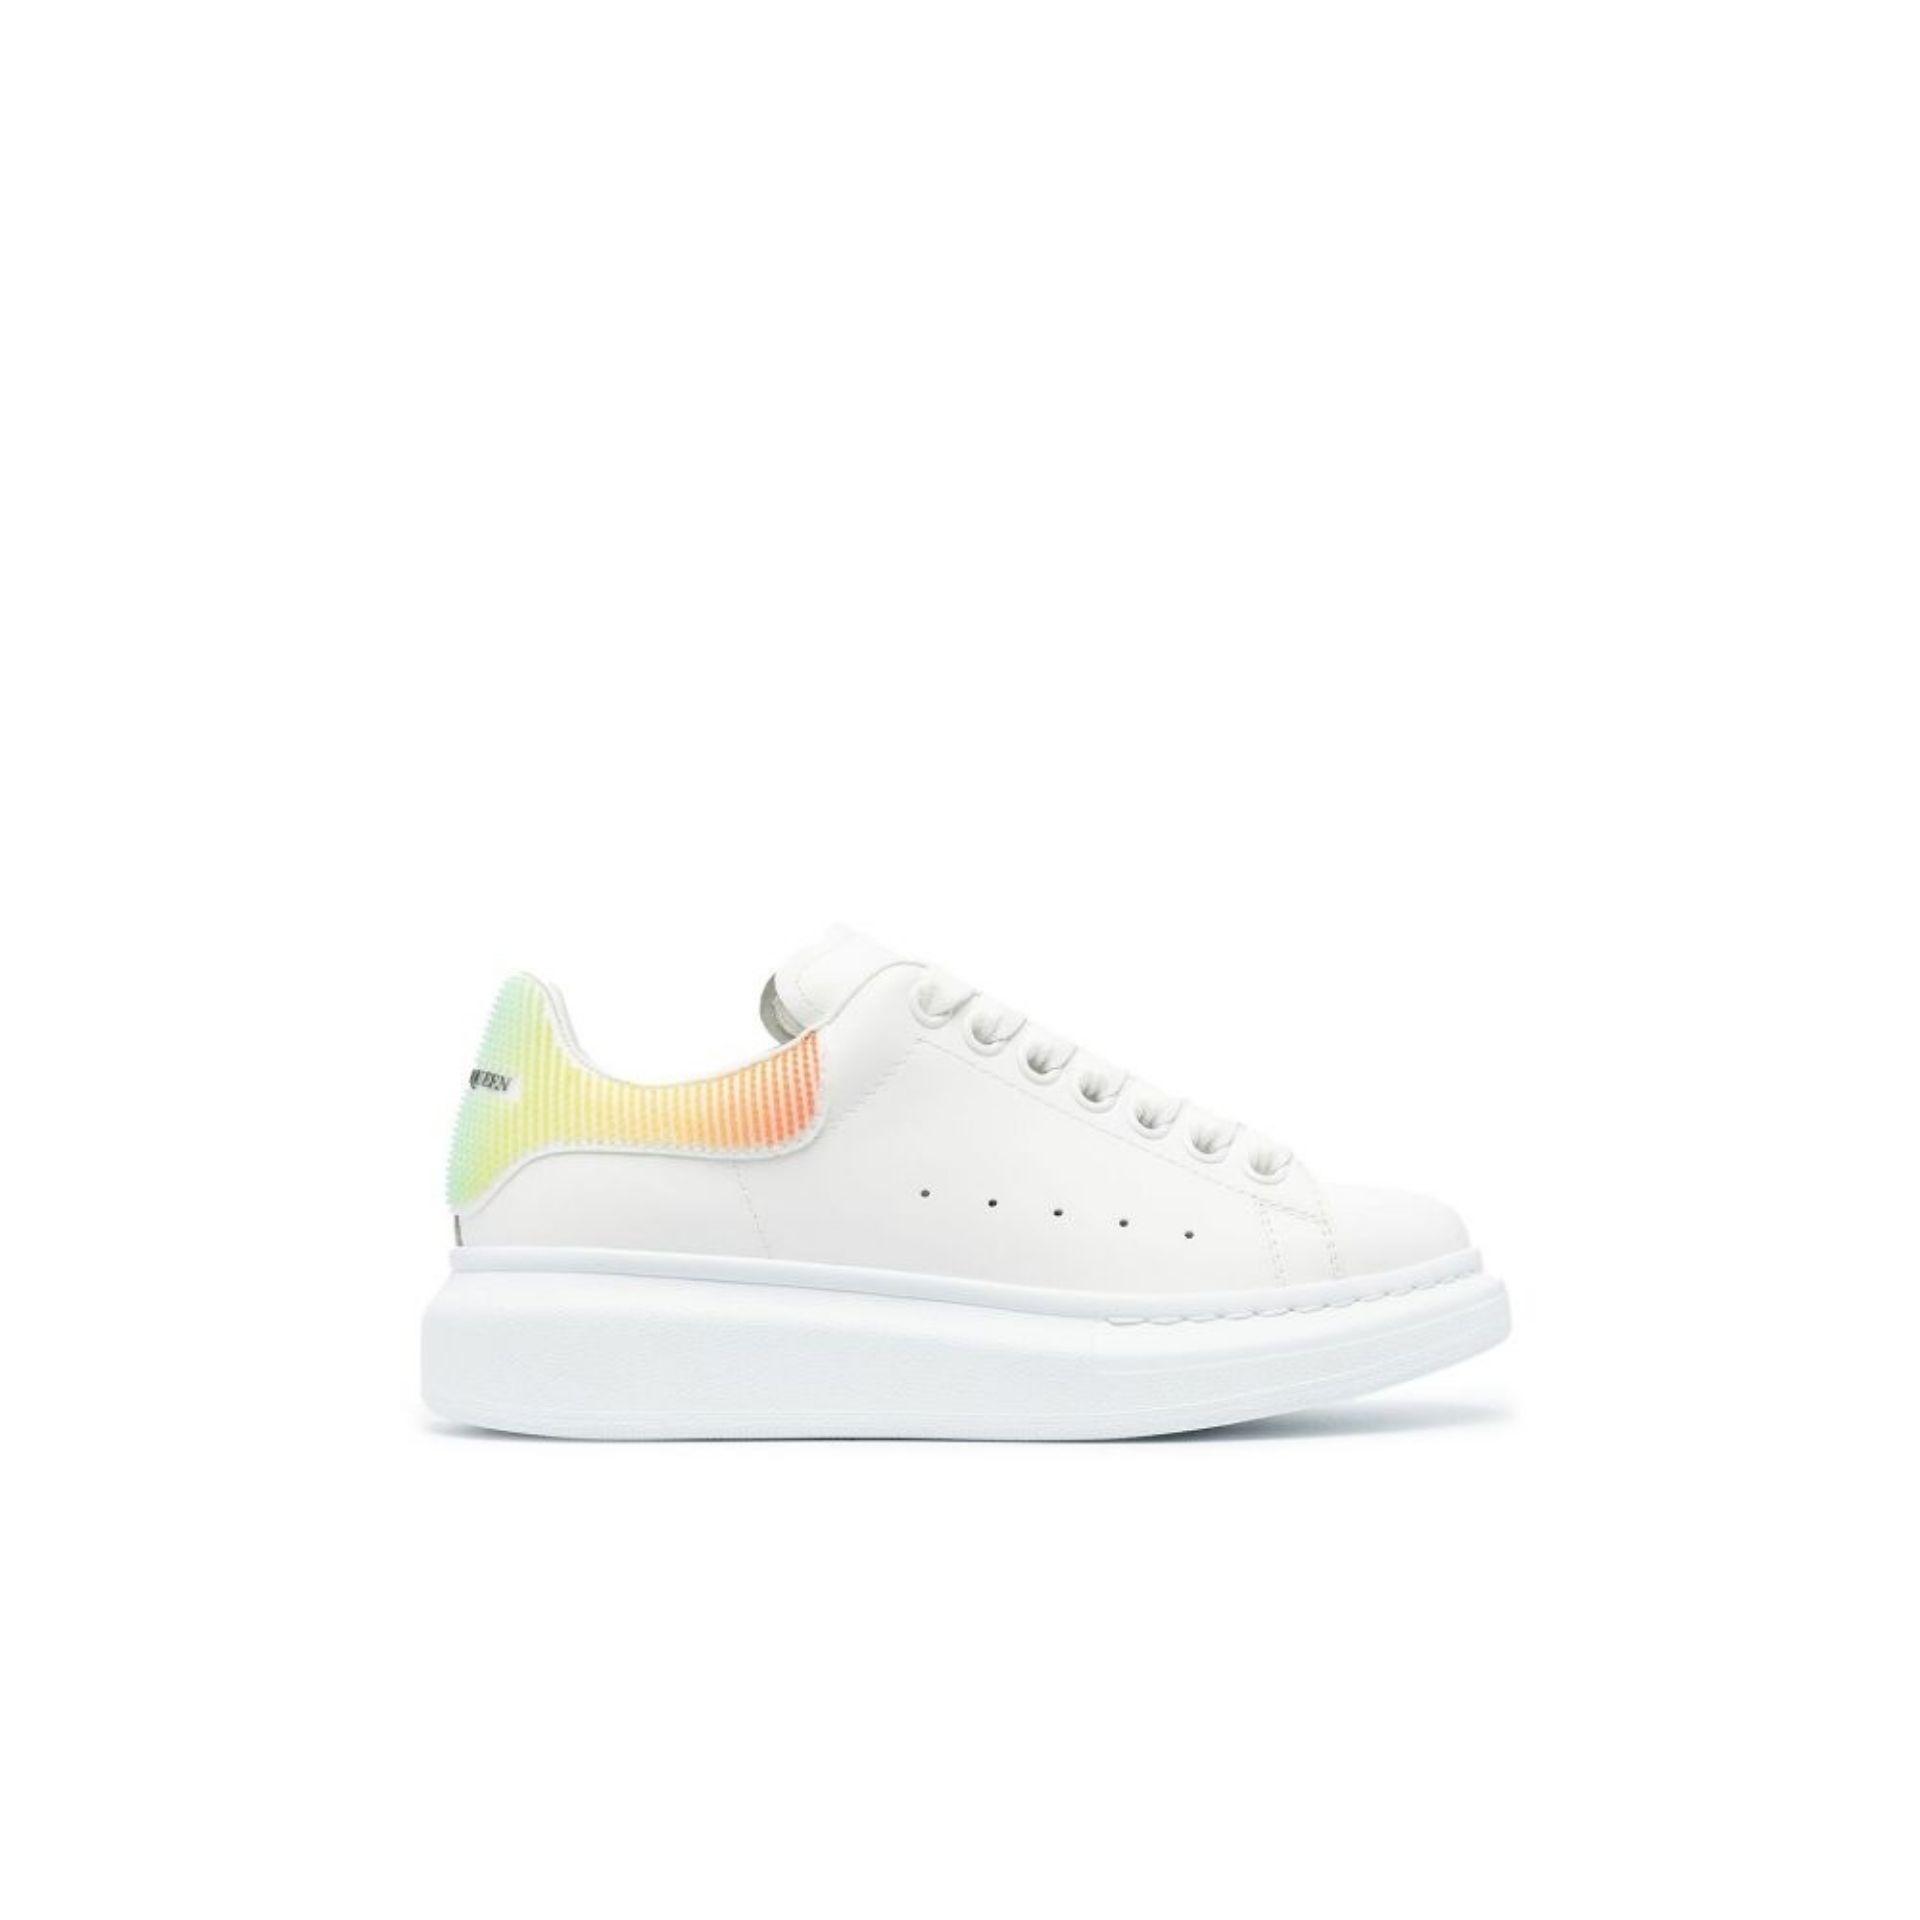 Alexander McQueen Leather Rainbow Lace-up Sneakers in White | Lyst